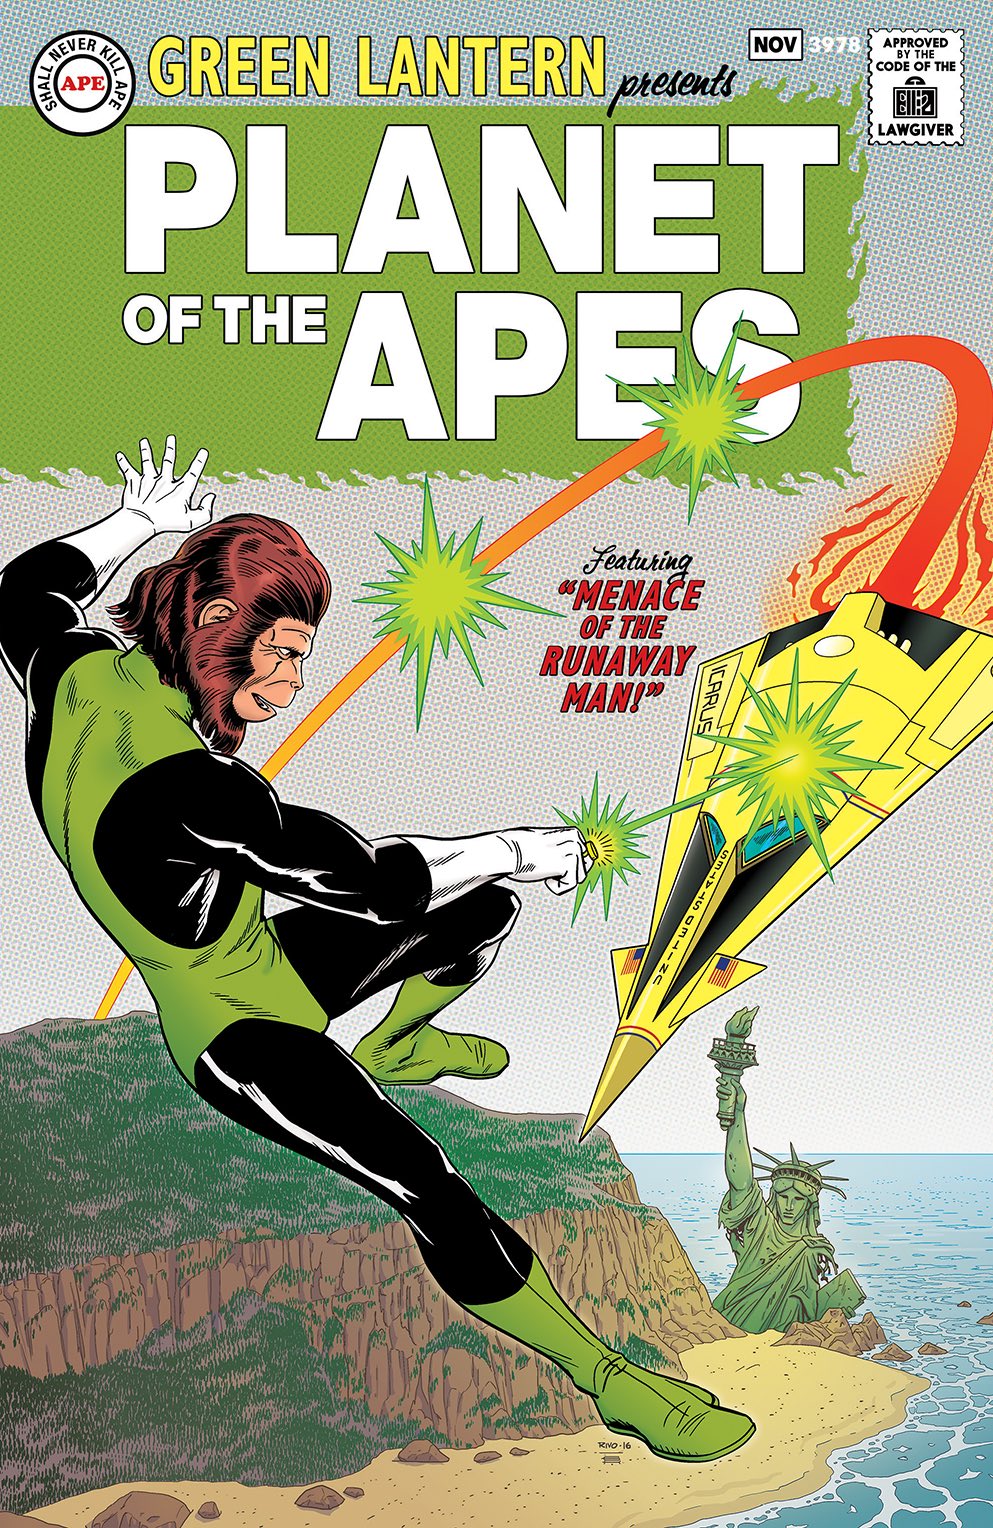 Planet of the Apes/Green Lantern #1 Review